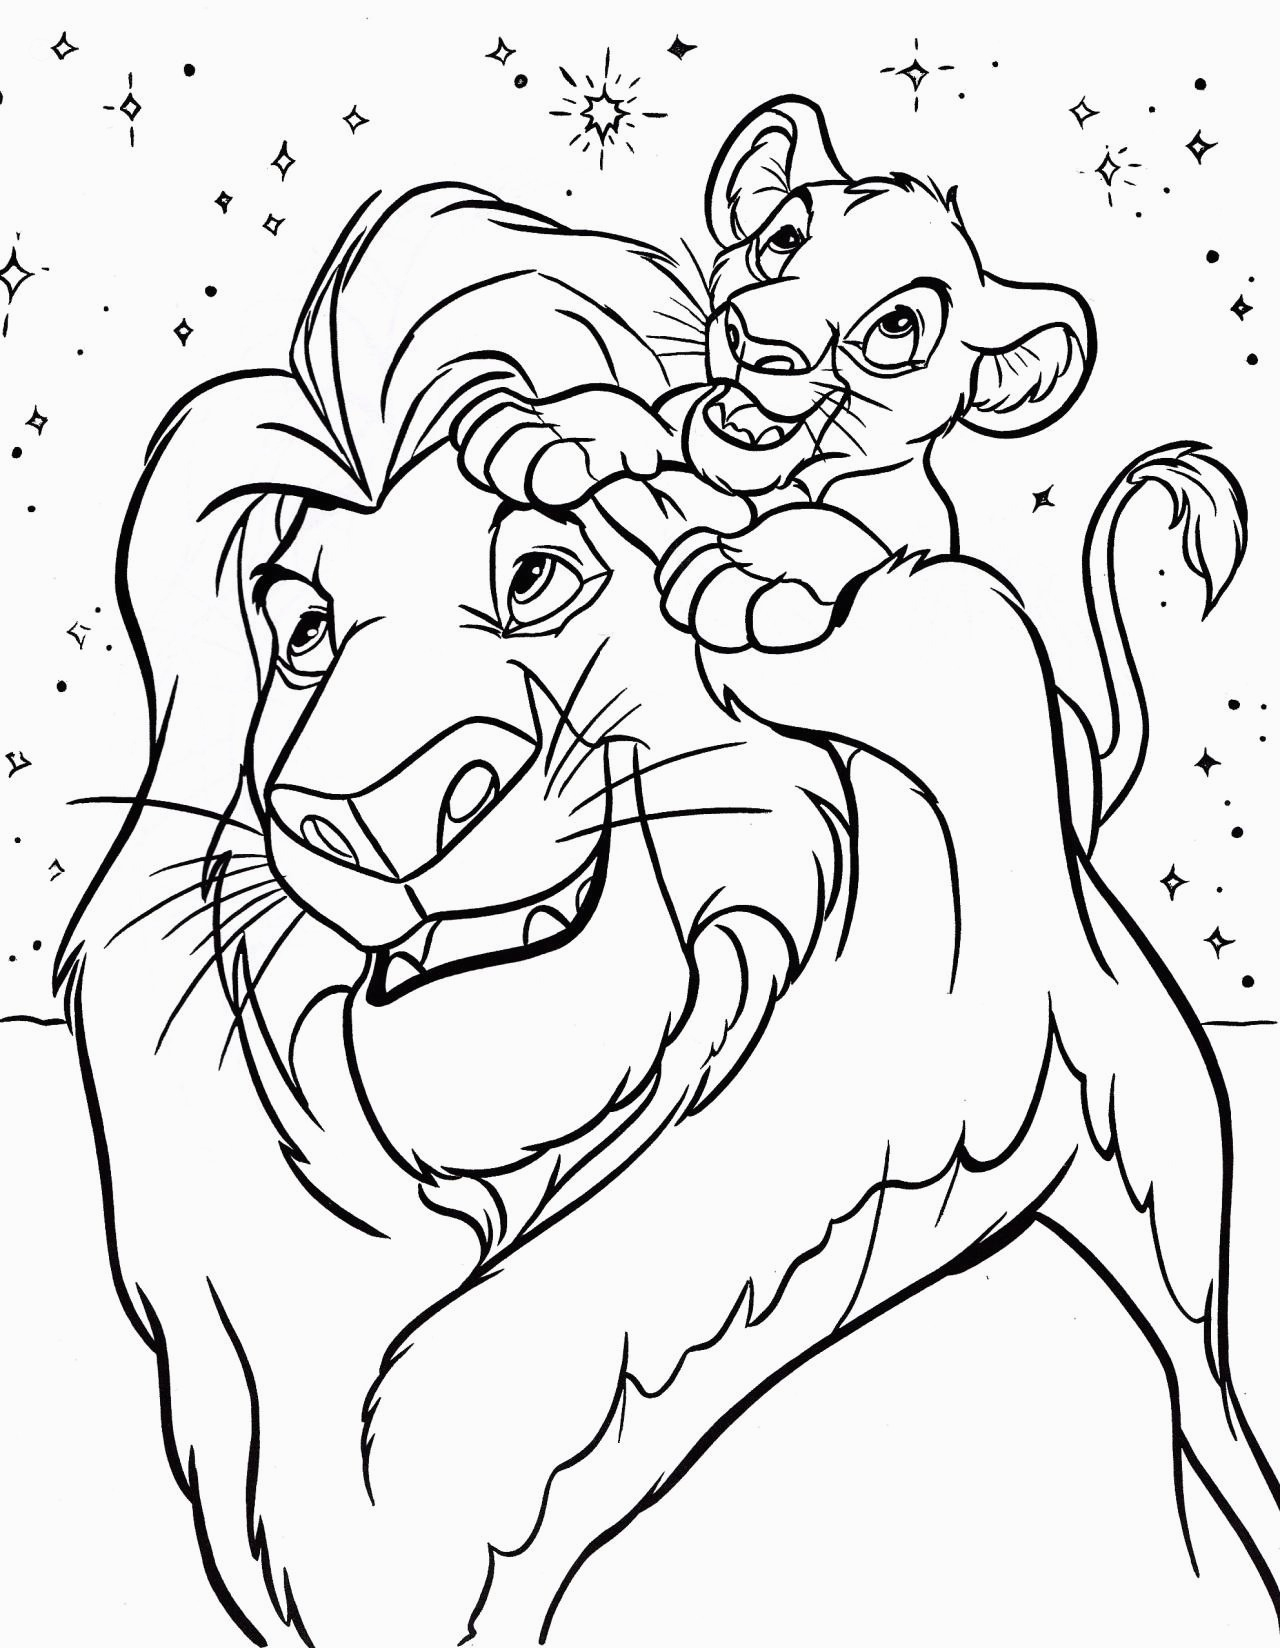 Free Printable Lion King Coloring Pages | Printable Coloring Pages - Free Printable Picture Of A Lion